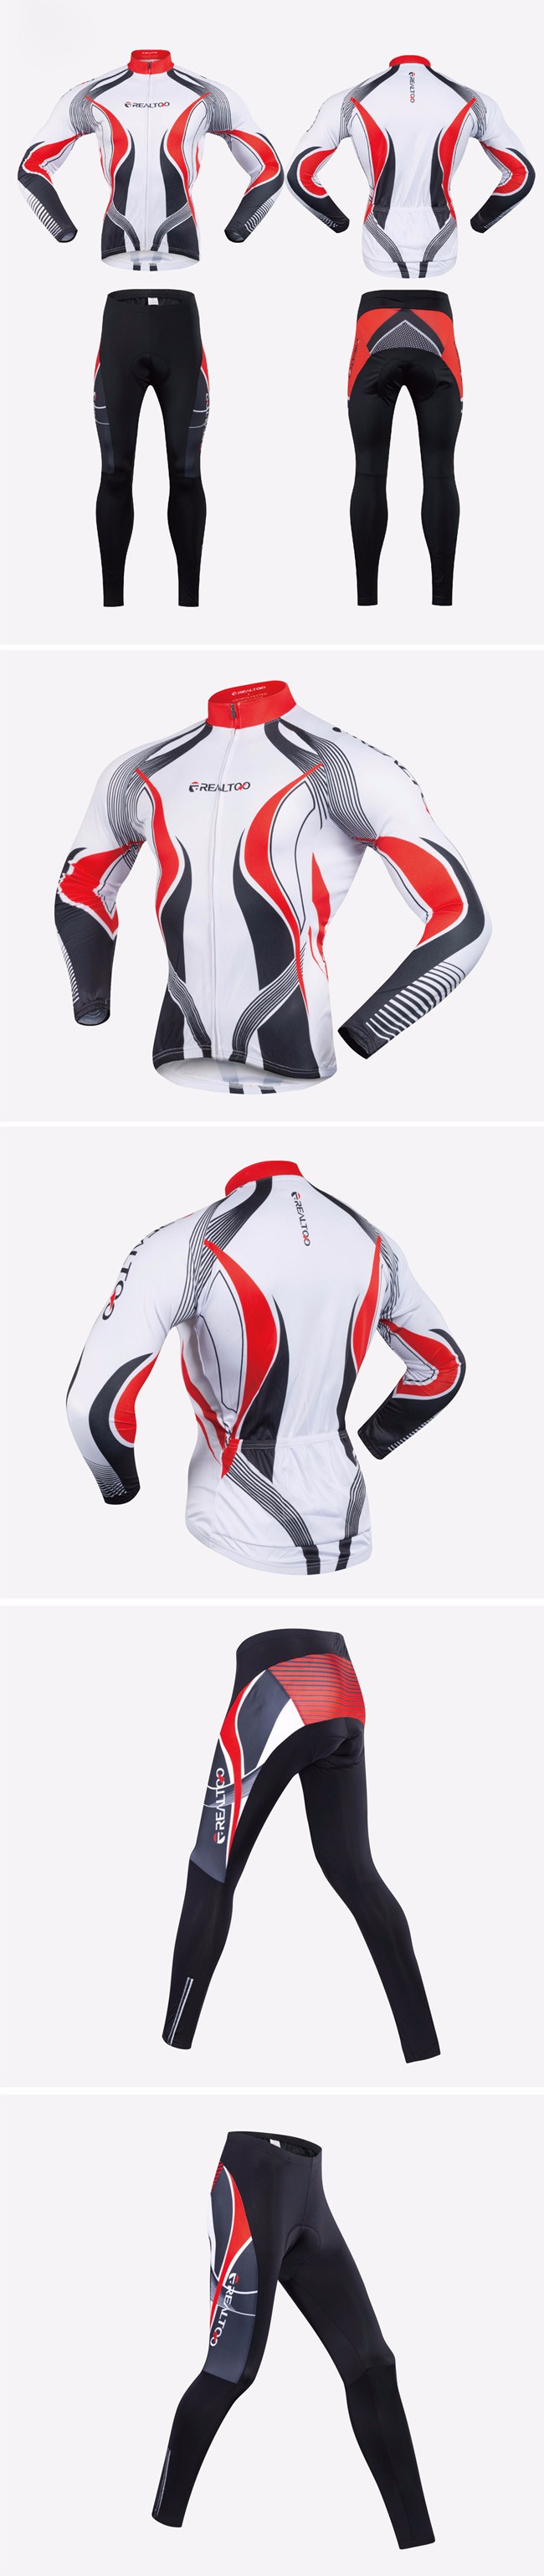 Men Breathable Long-sleeved Riding Clothes Suit with 3D Sponge Padded